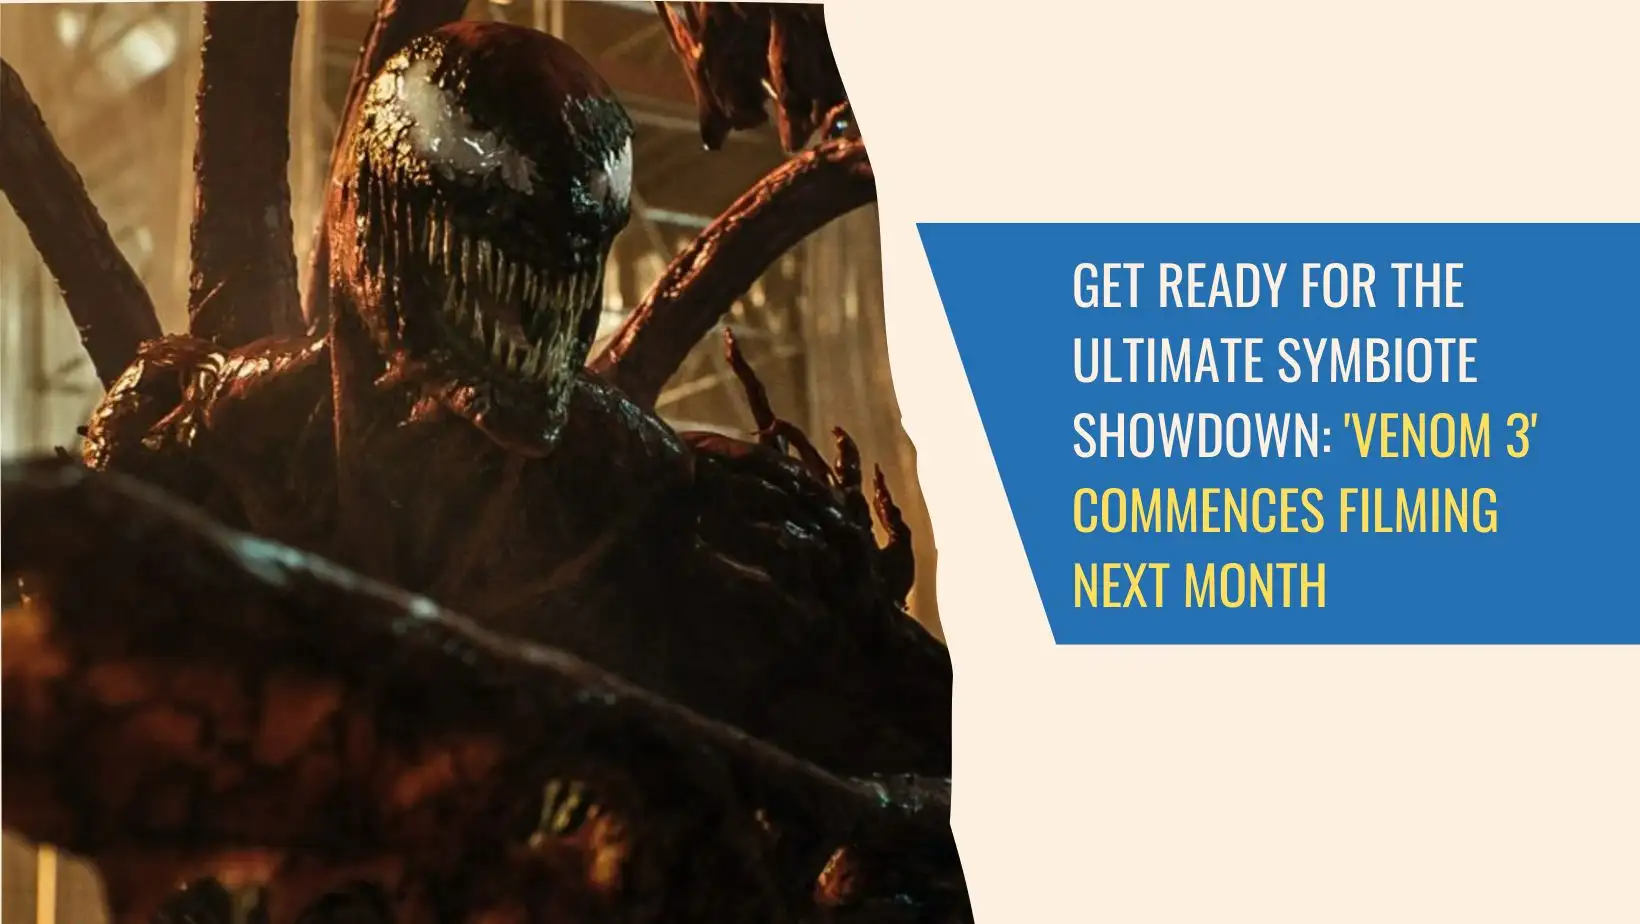 Get Ready for the Ultimate Symbiote Showdown 'Venom 3' Commences Filming Next Month